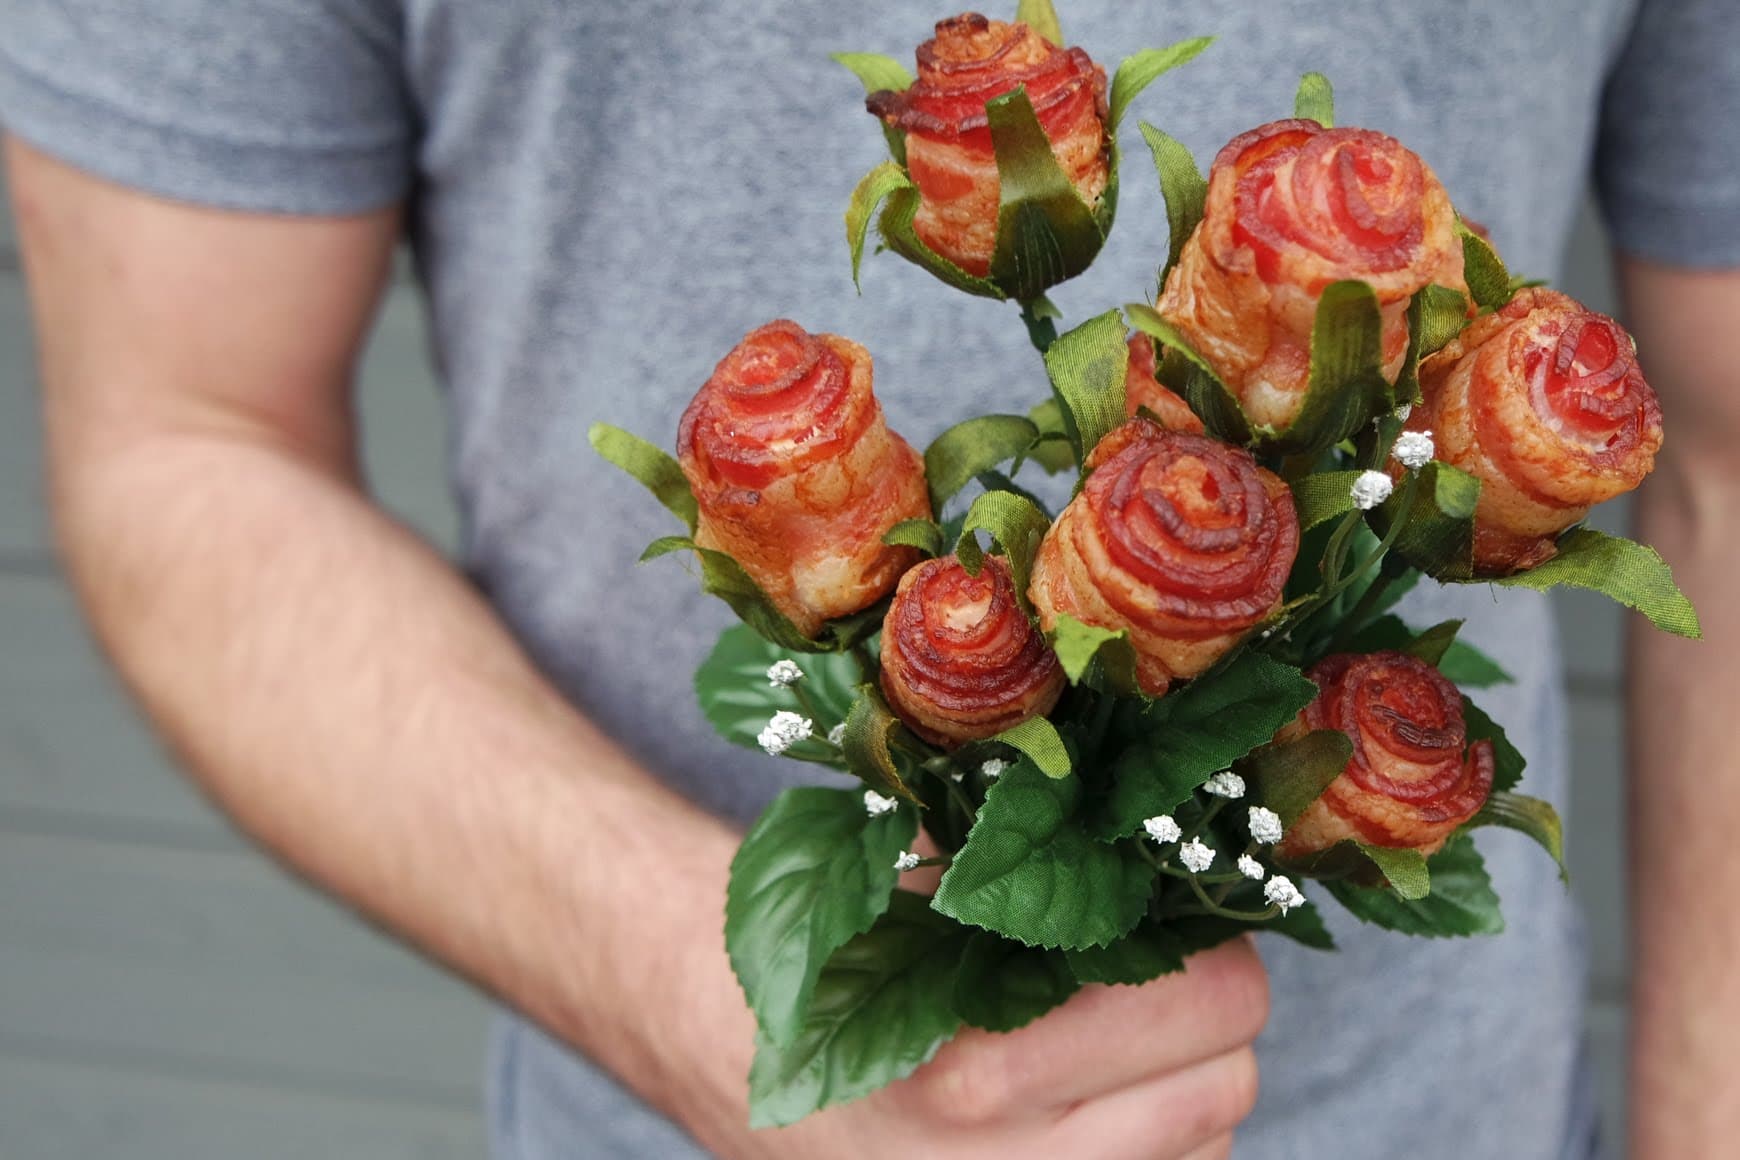 How To Make Bacon Roses: A Delicious And Romantic Bacon Gift Idea